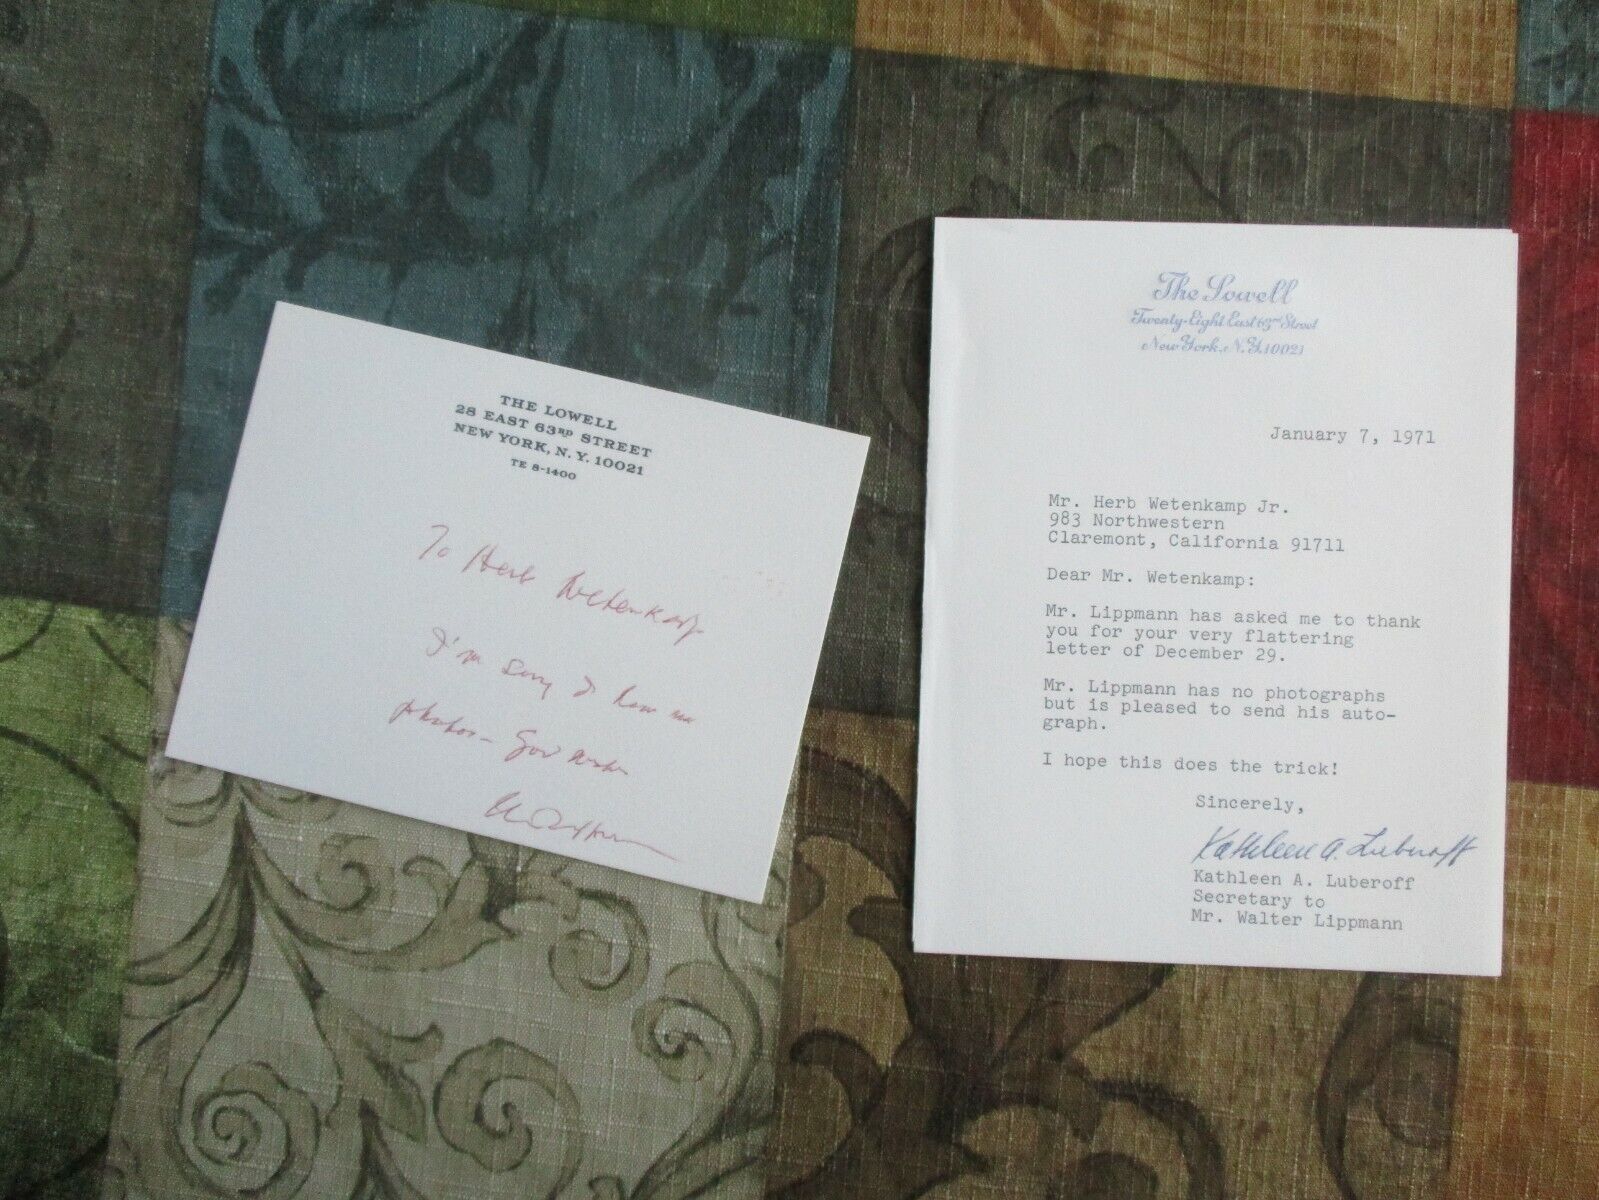 Walter Lippmann (Cold War,Author,Pulizer Prizes) signed The Lowell letter